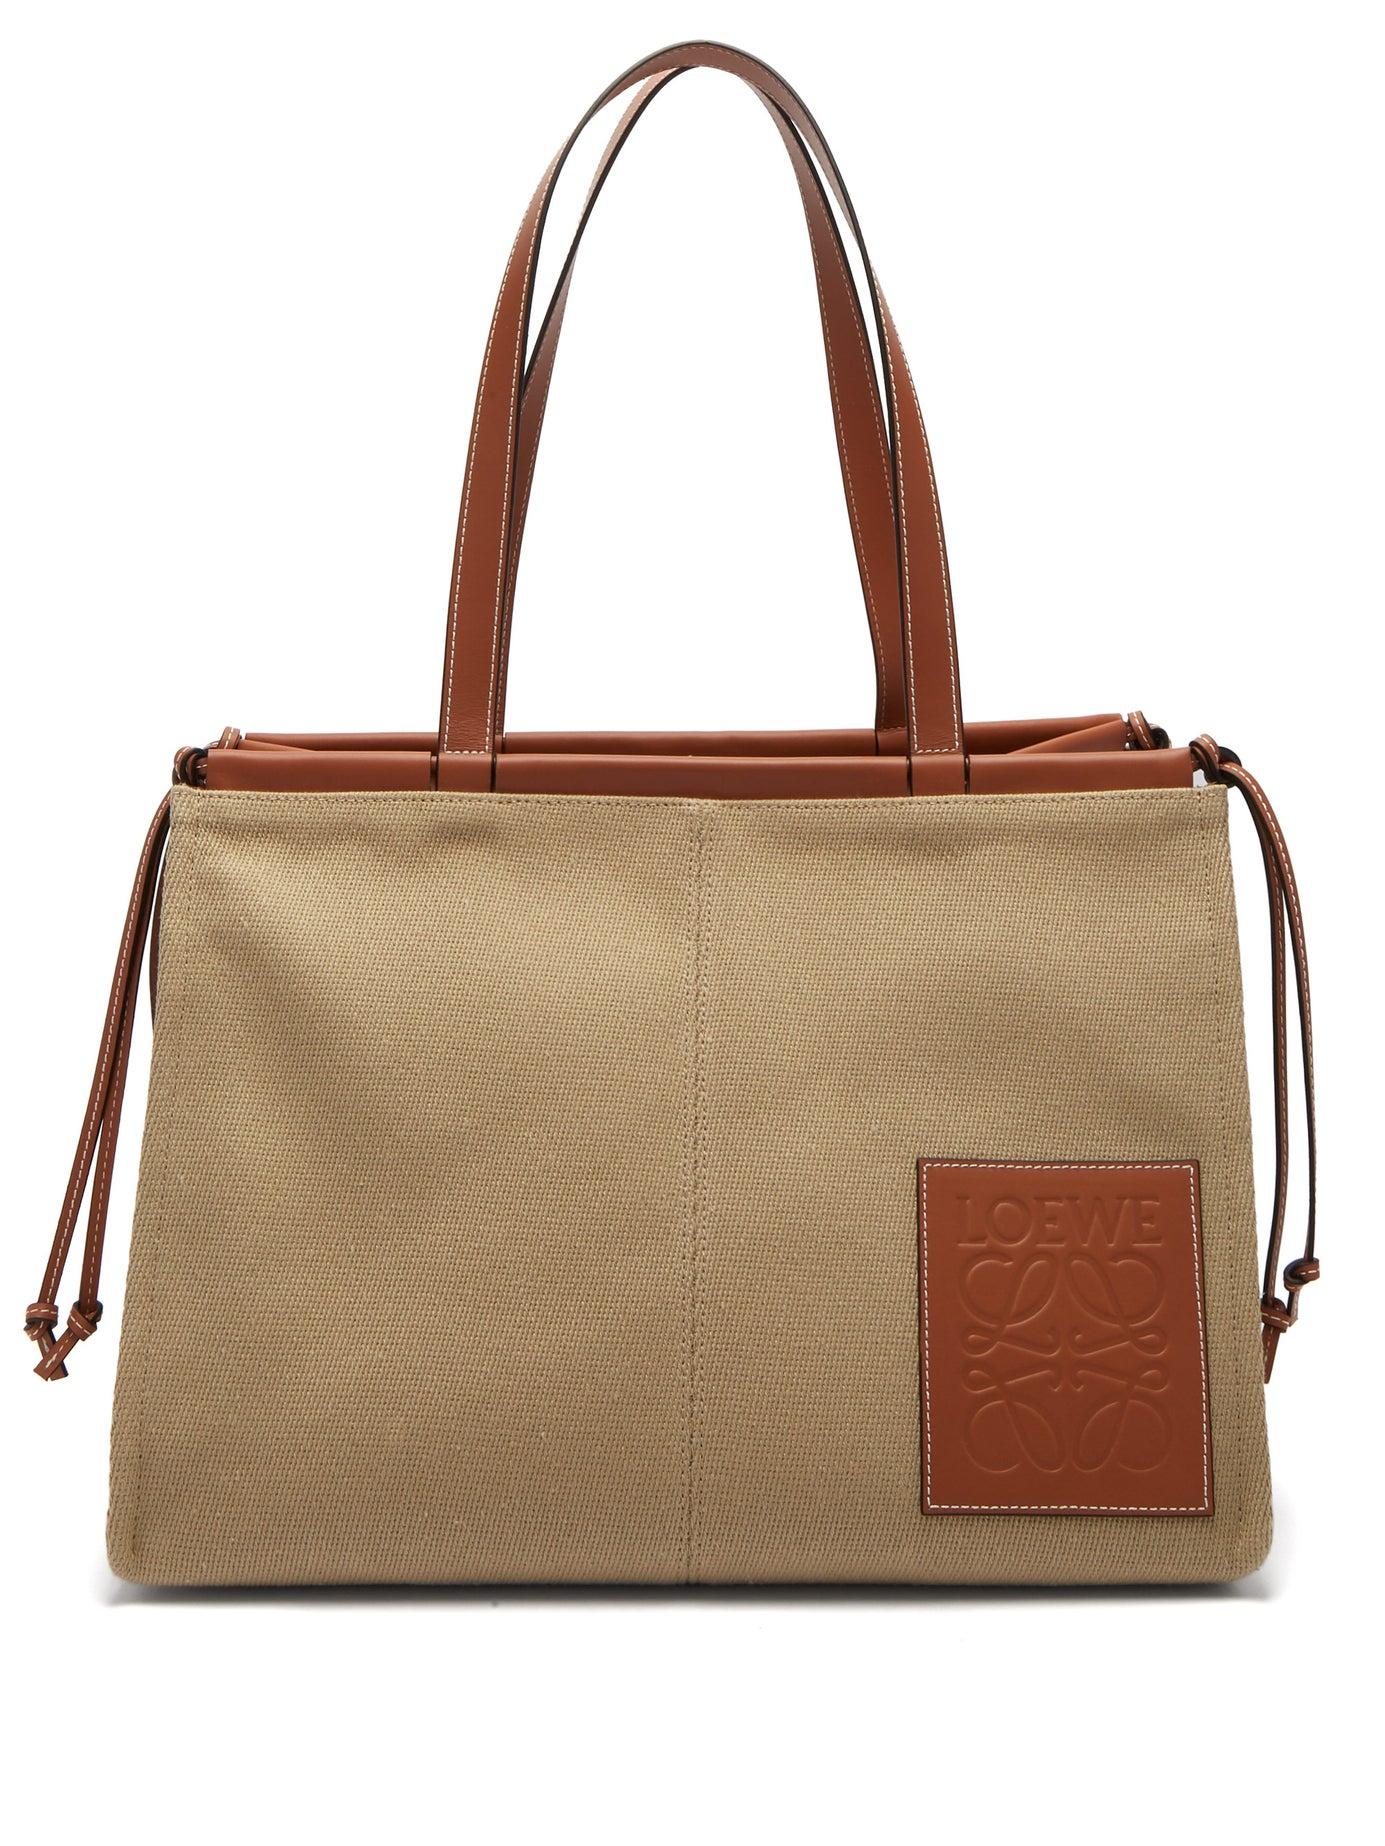 Loewe Cushion Small Canvas Tote Bag in Natural | Lyst